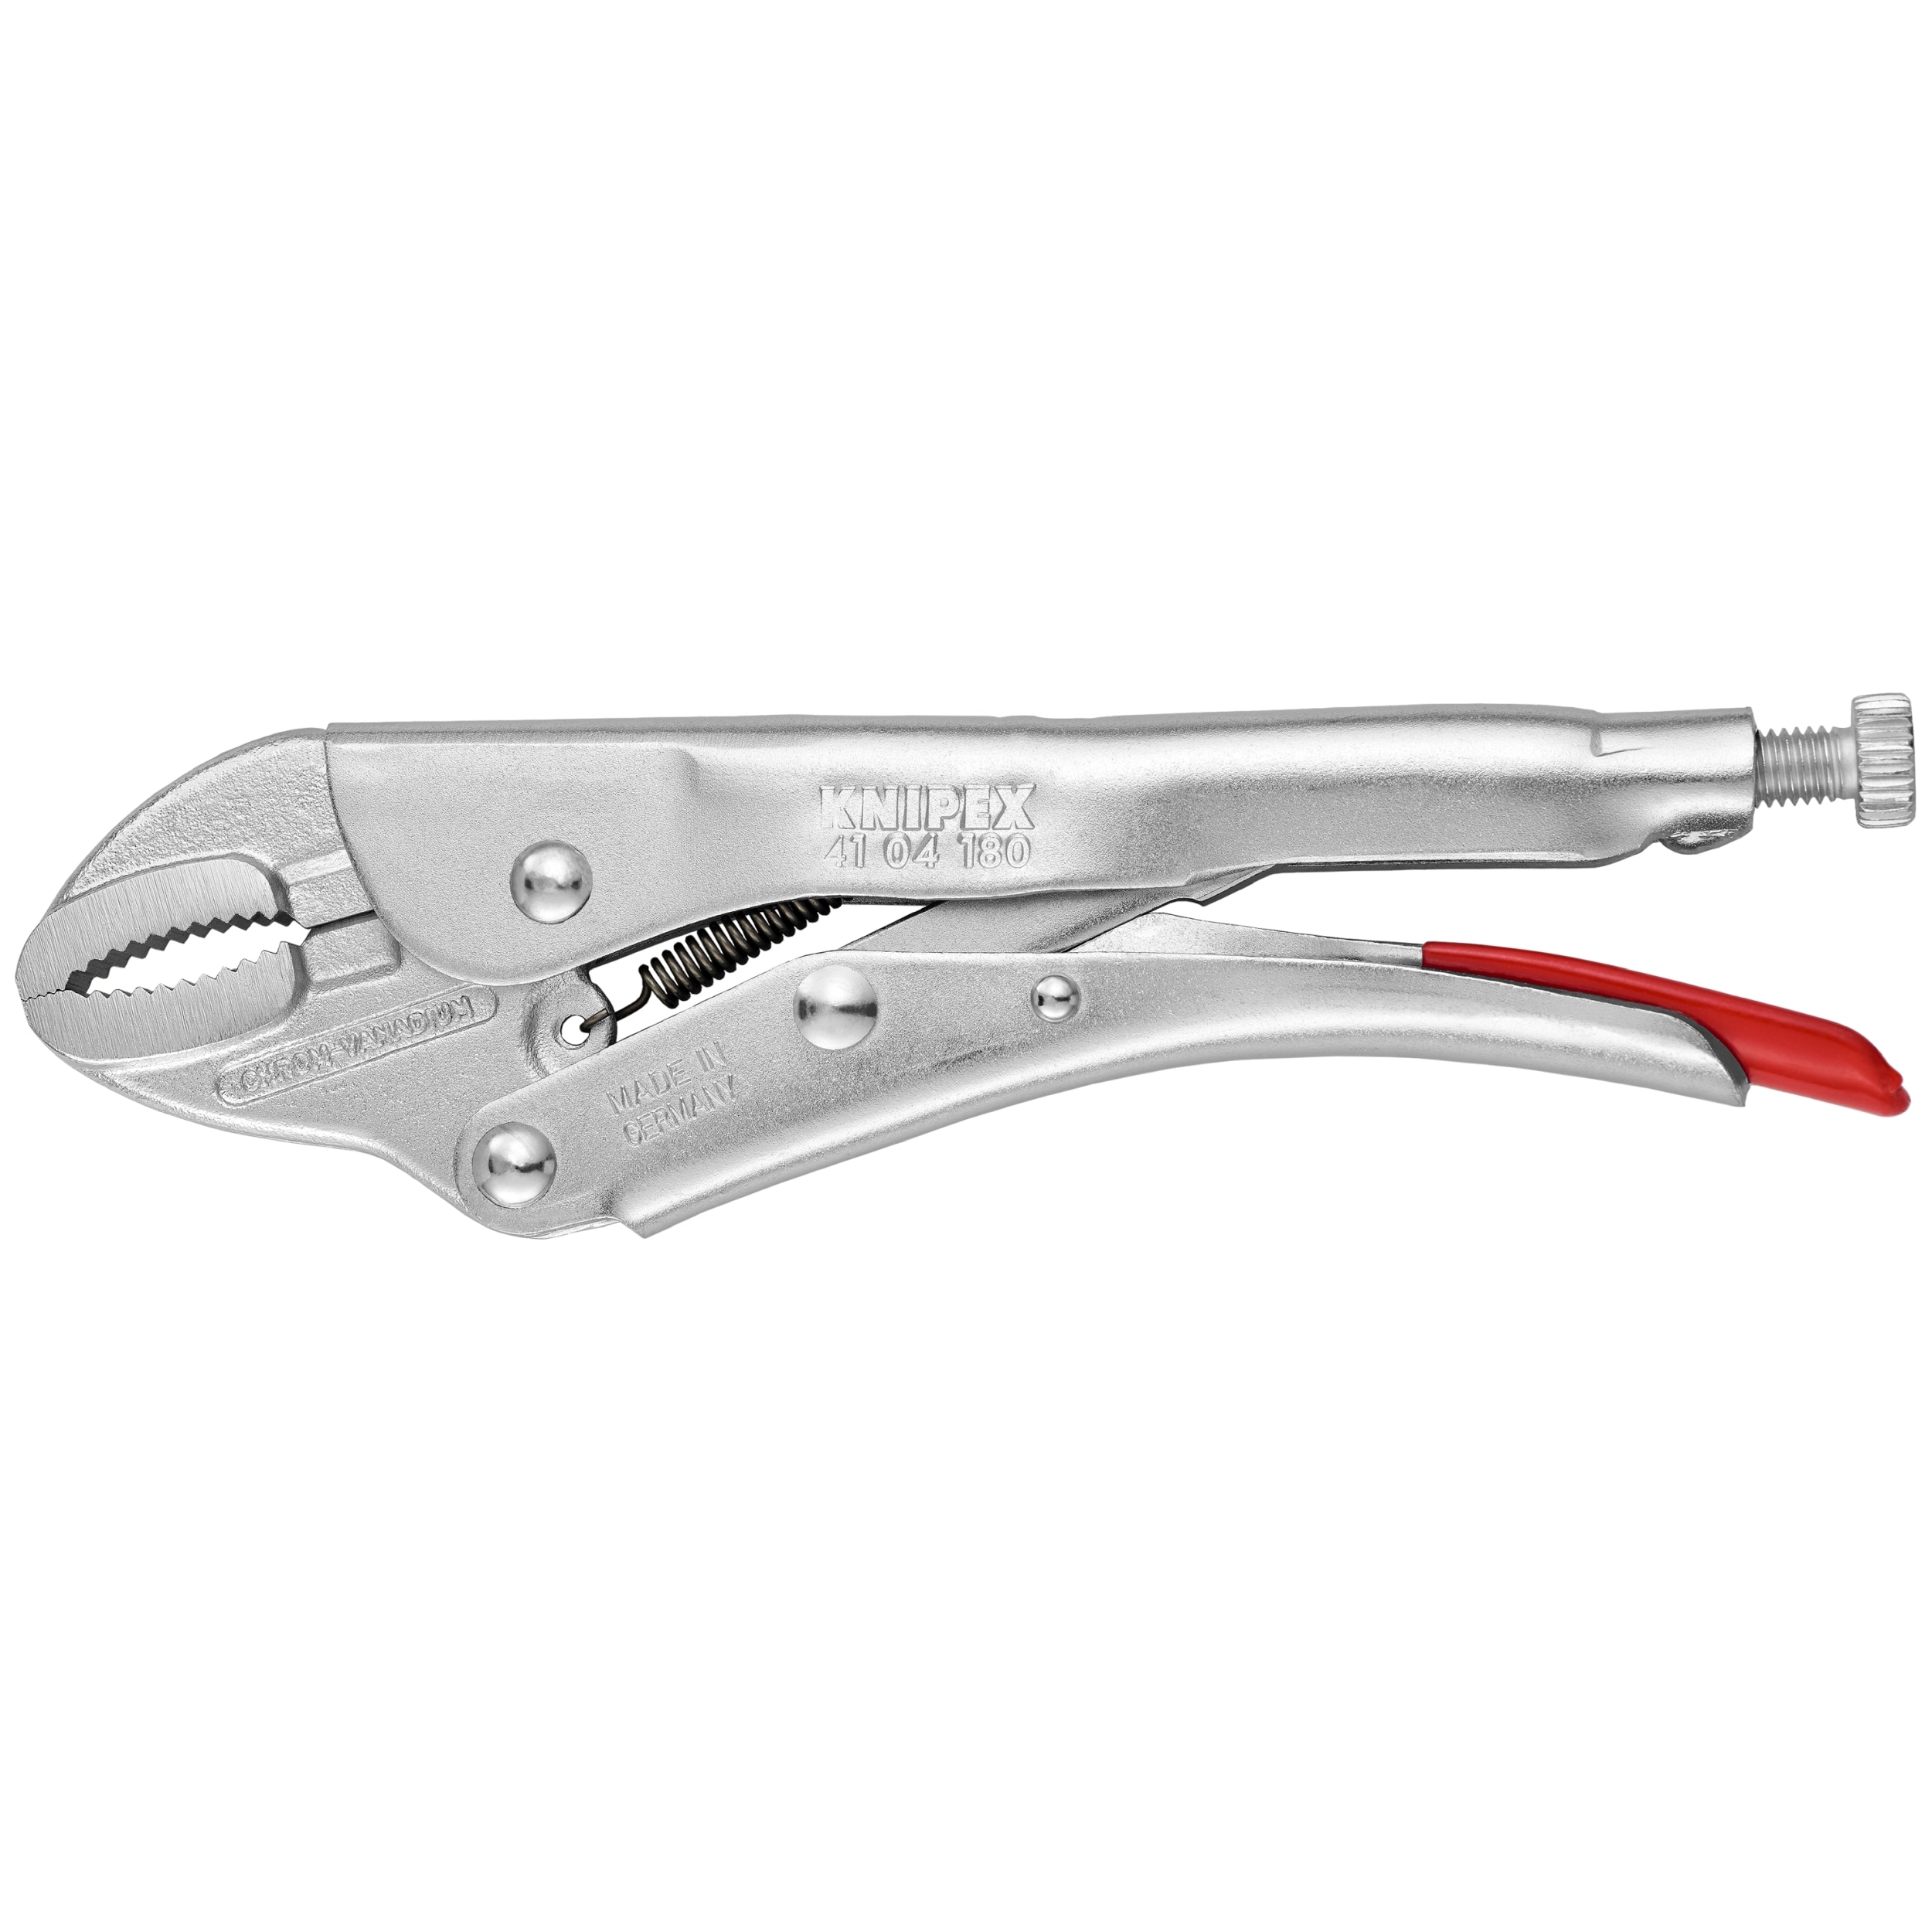 Crescent 5-in Automotive Locking Pliers with Wire Cutter in the